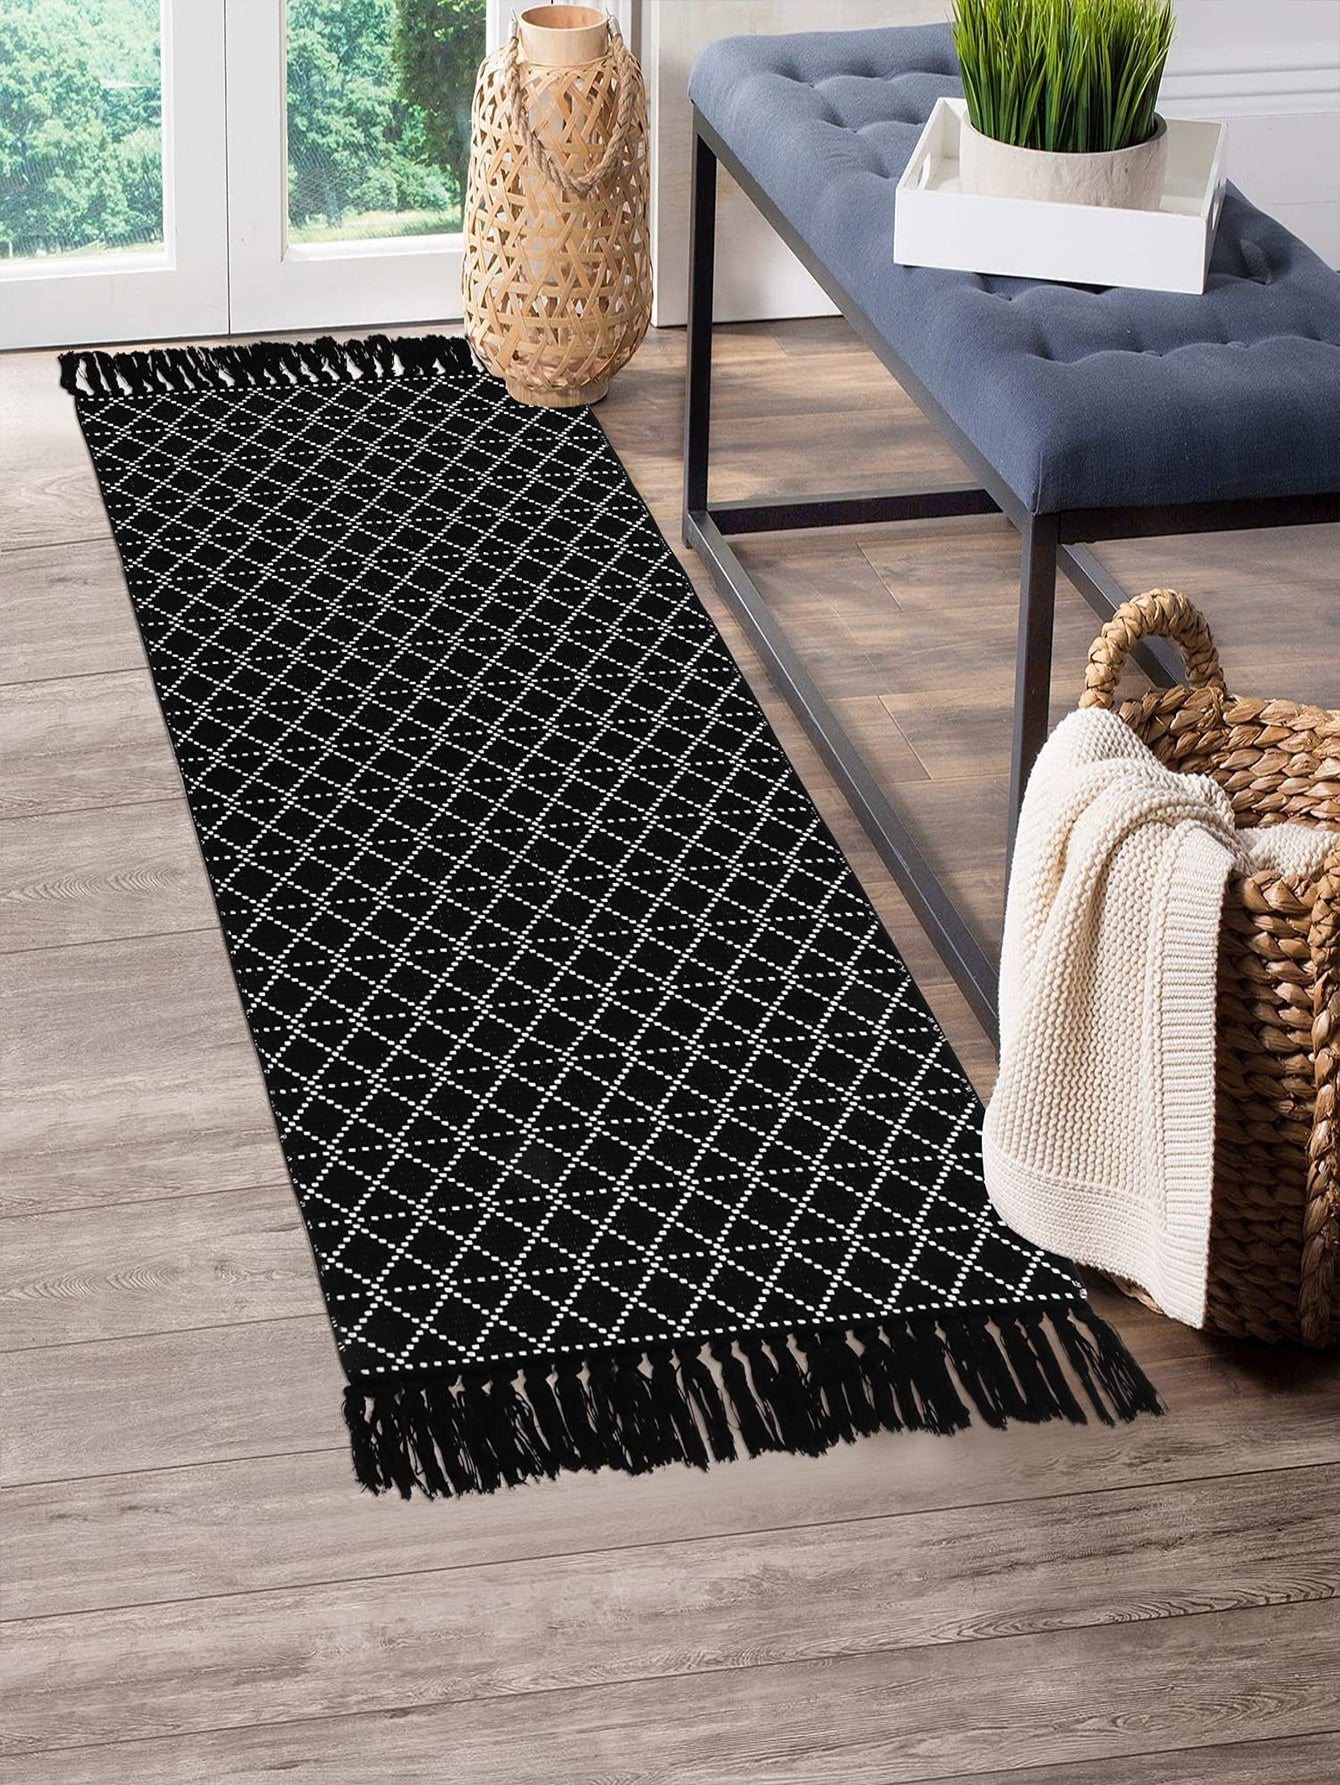 Yoga Rug - Floor light rug for indoor or outdoor yoga Yoga and Meditation Products - Personal Hour